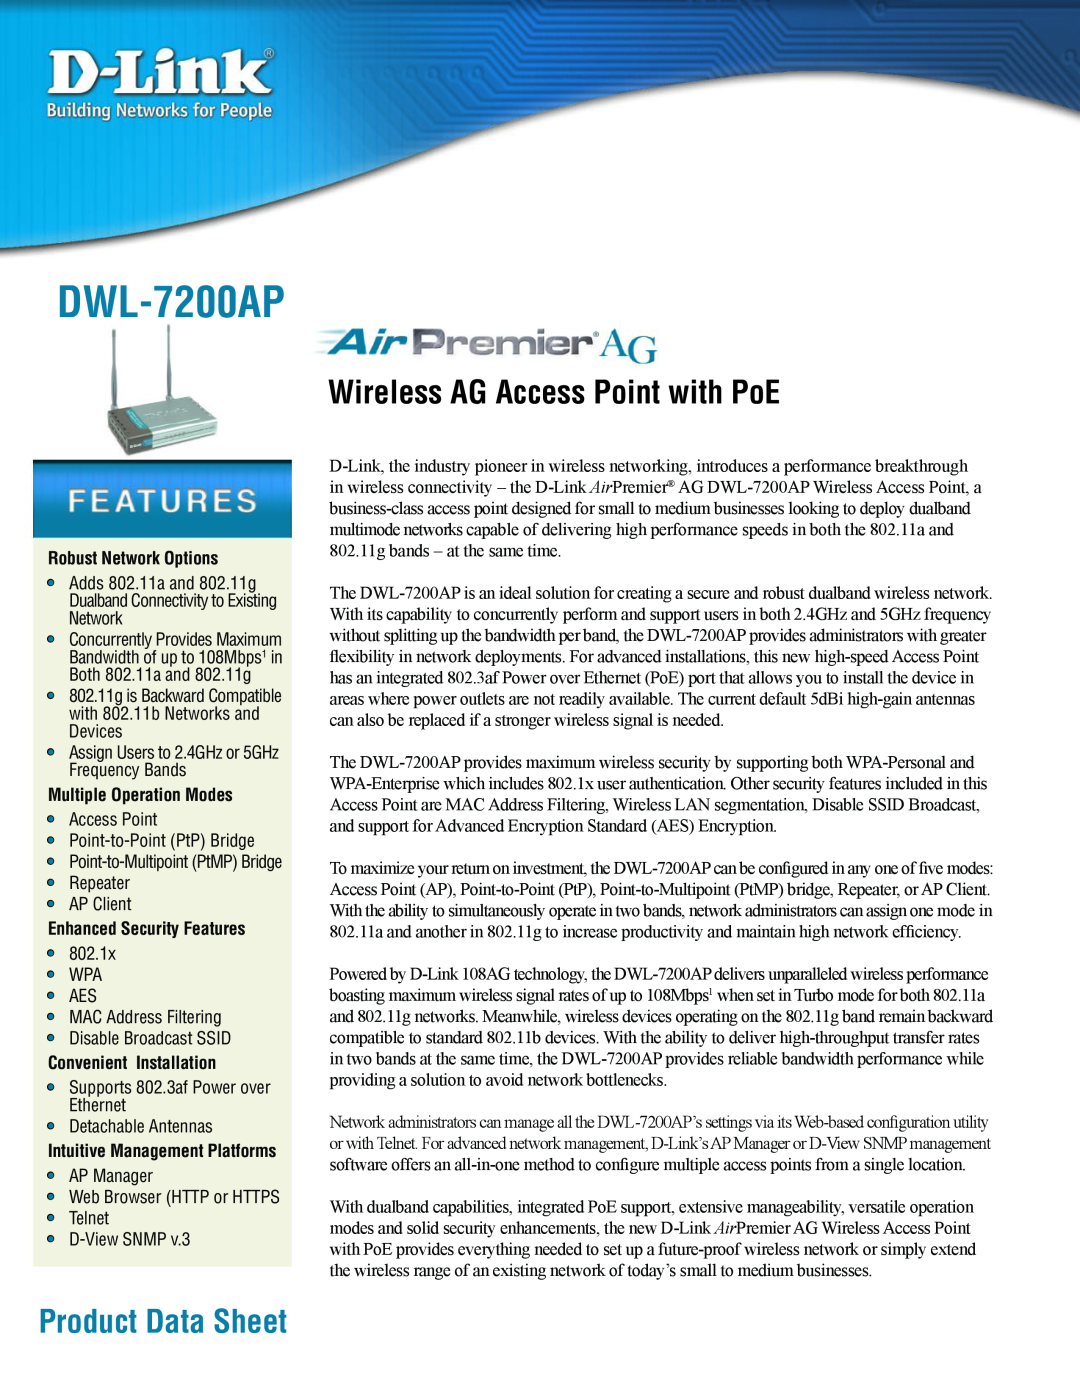 D-Link DWL-7200AP manual Product Data Sheet, Wireless AG Access Point with PoE 